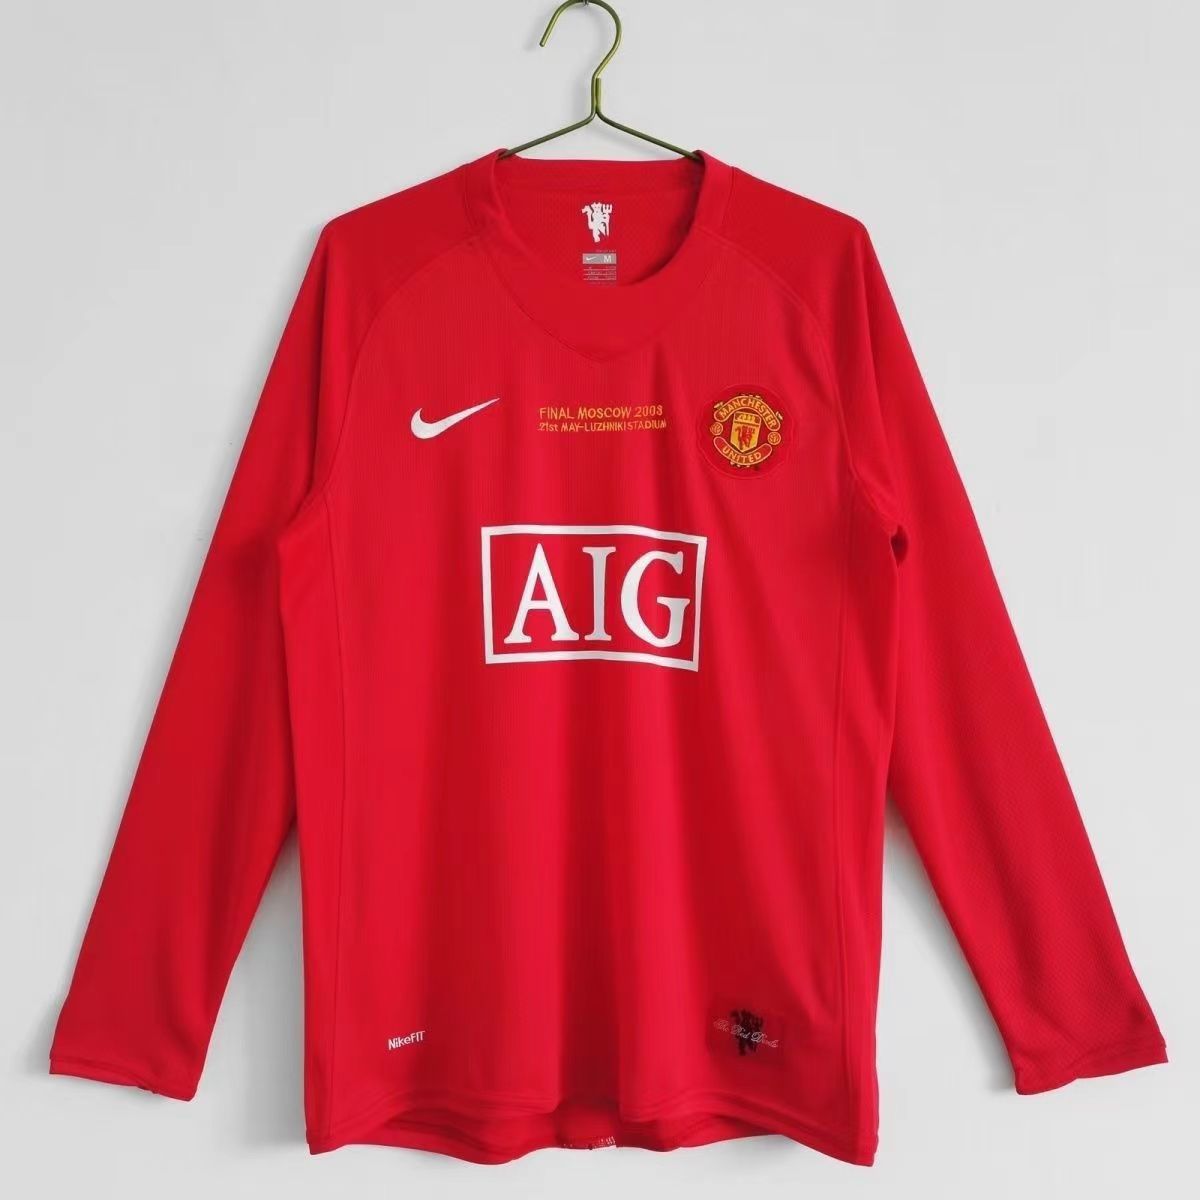 Retro 07/08 Manchester United Home long sleeve